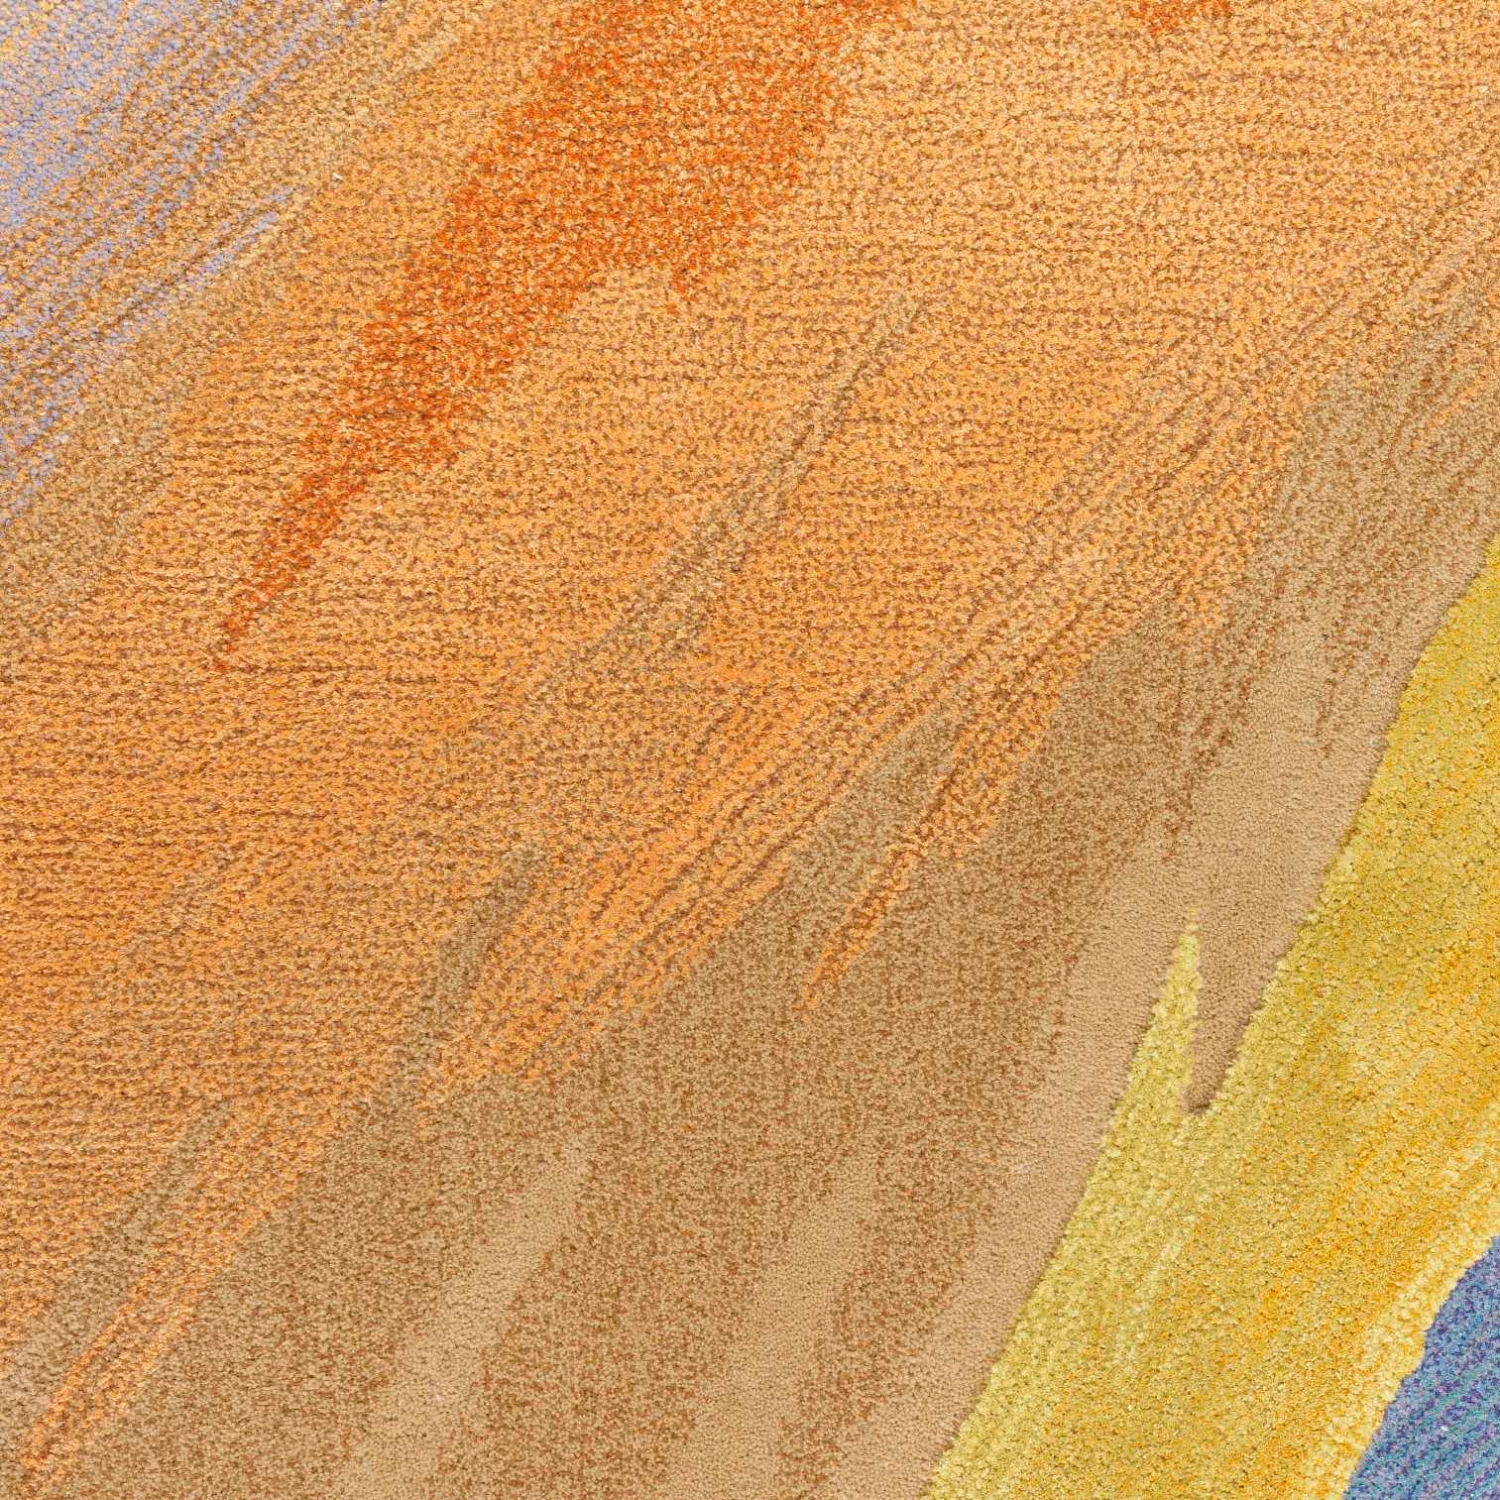 Prism Rug Multi 8 x 10 Close Up of Colors and Texture Details